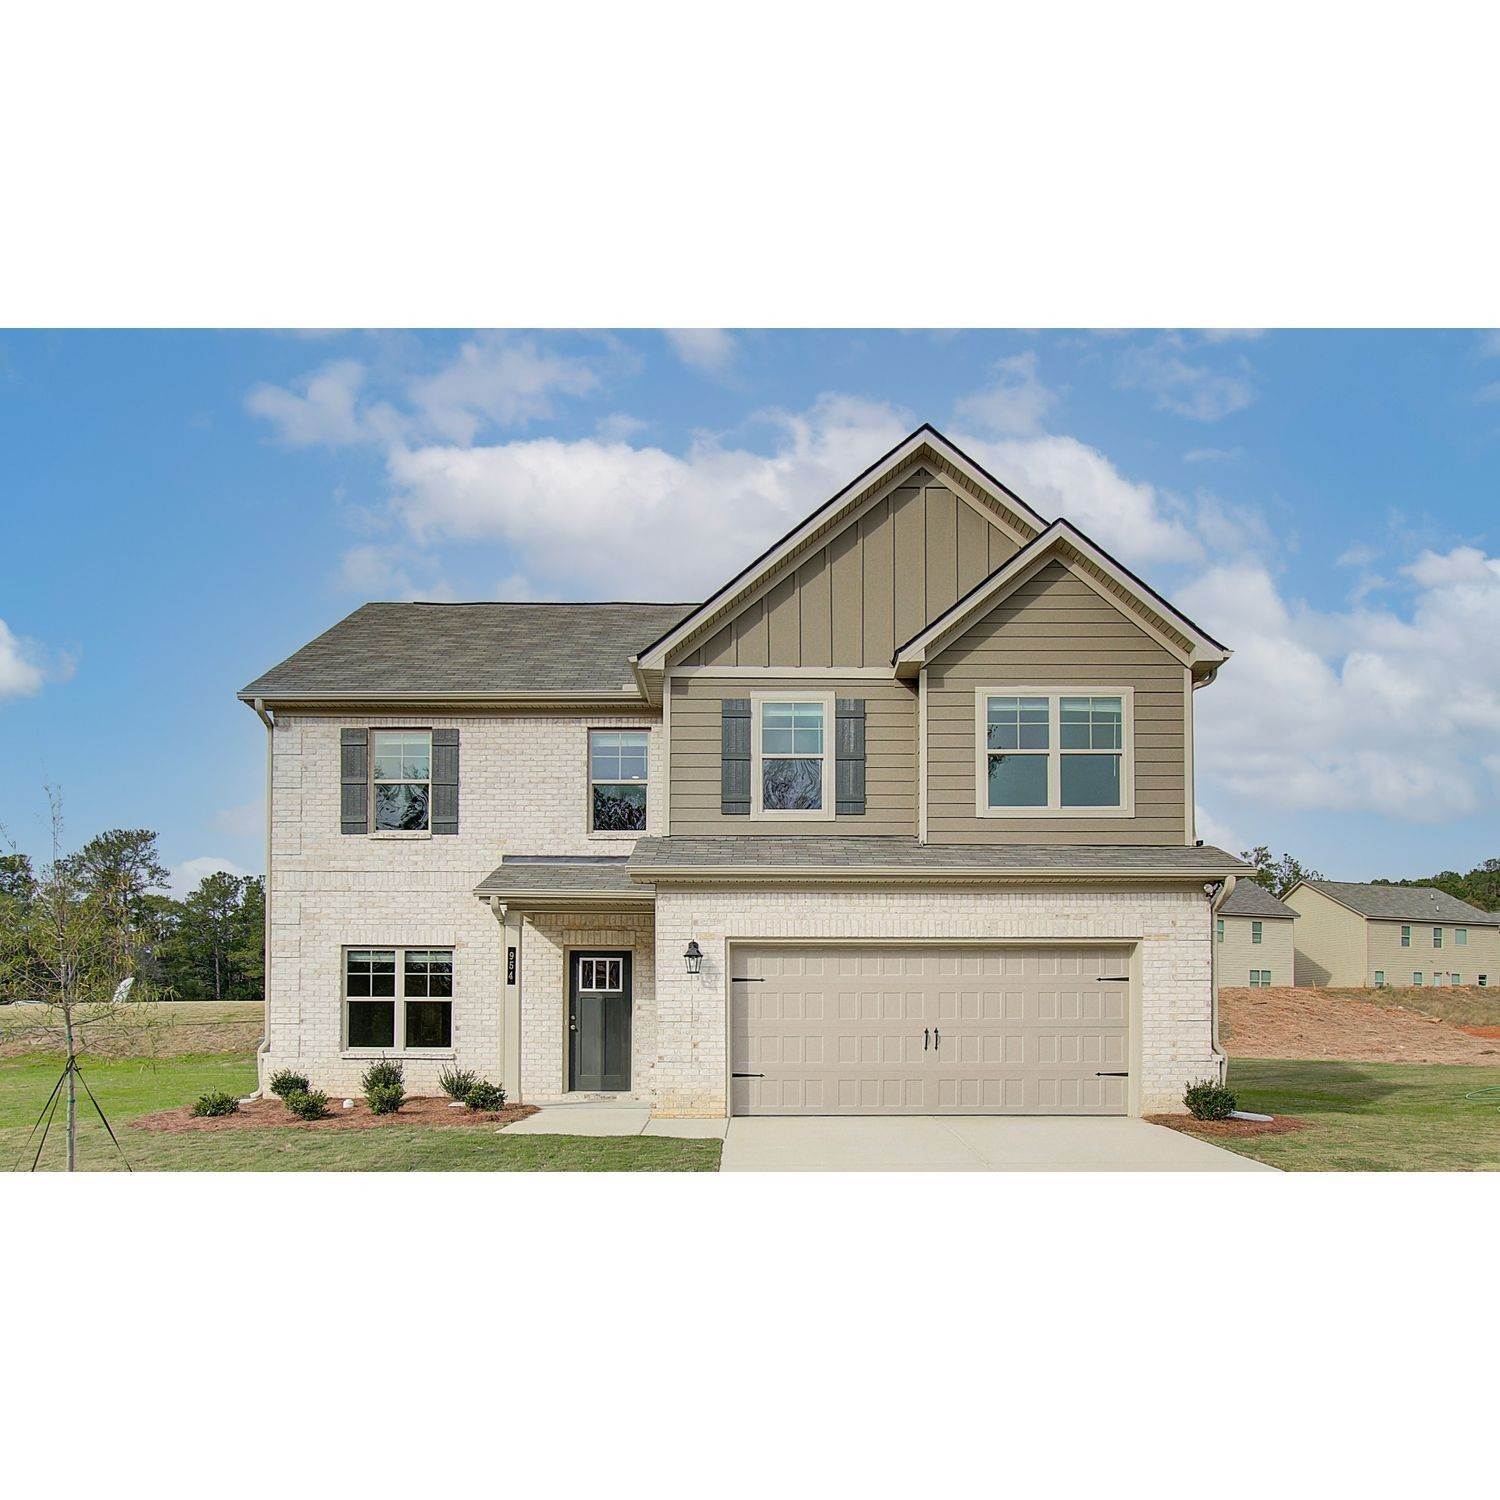 Single Family for Sale at Loganville, GA 30052